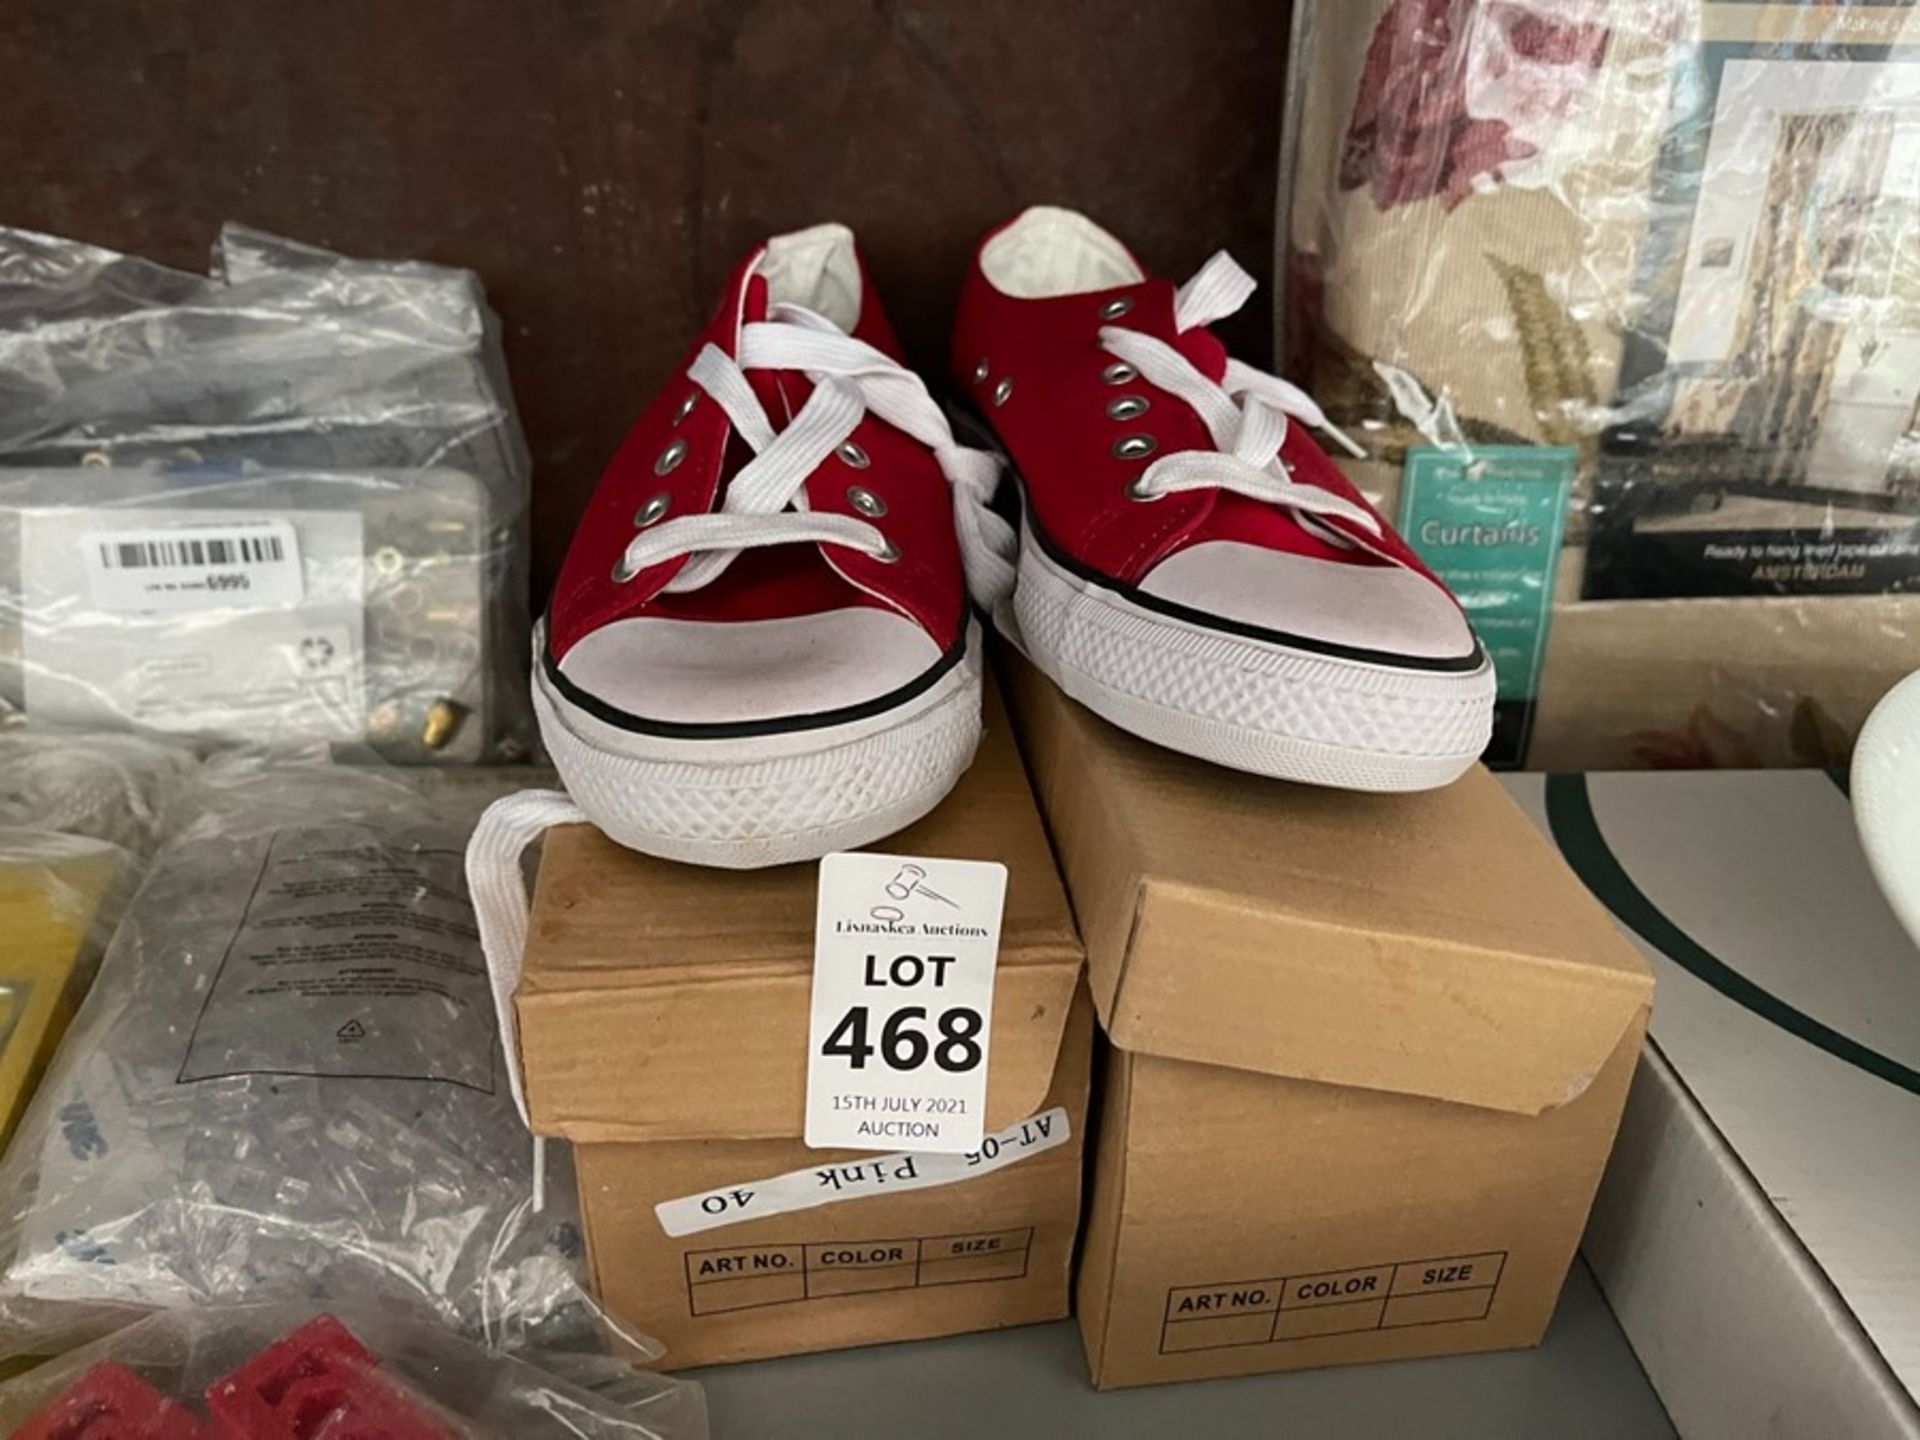 3X PAIRS OF CONVERSE STYLE SHOES (SIZE 39/40)